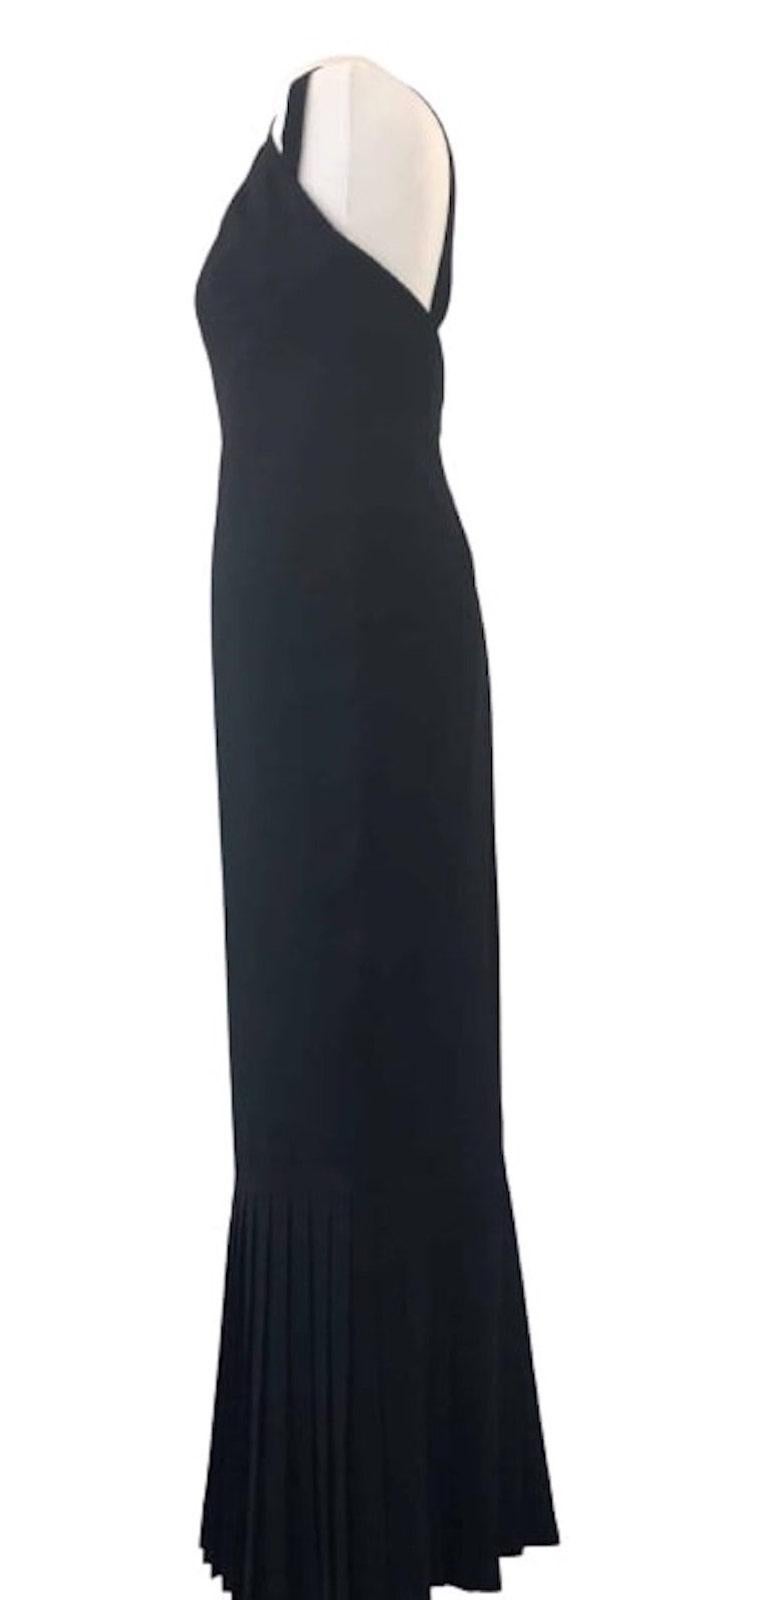 A stunning KARL LAGERFELD PARIS Black Long Evening Dress Circa 2000 with a V-neck, thin straps, a sleeveless gowns design, 2 small buttons closure in the neck with an invisible zip, ruffle pleated at the bottom, a very chic sheath silhouette. Feel